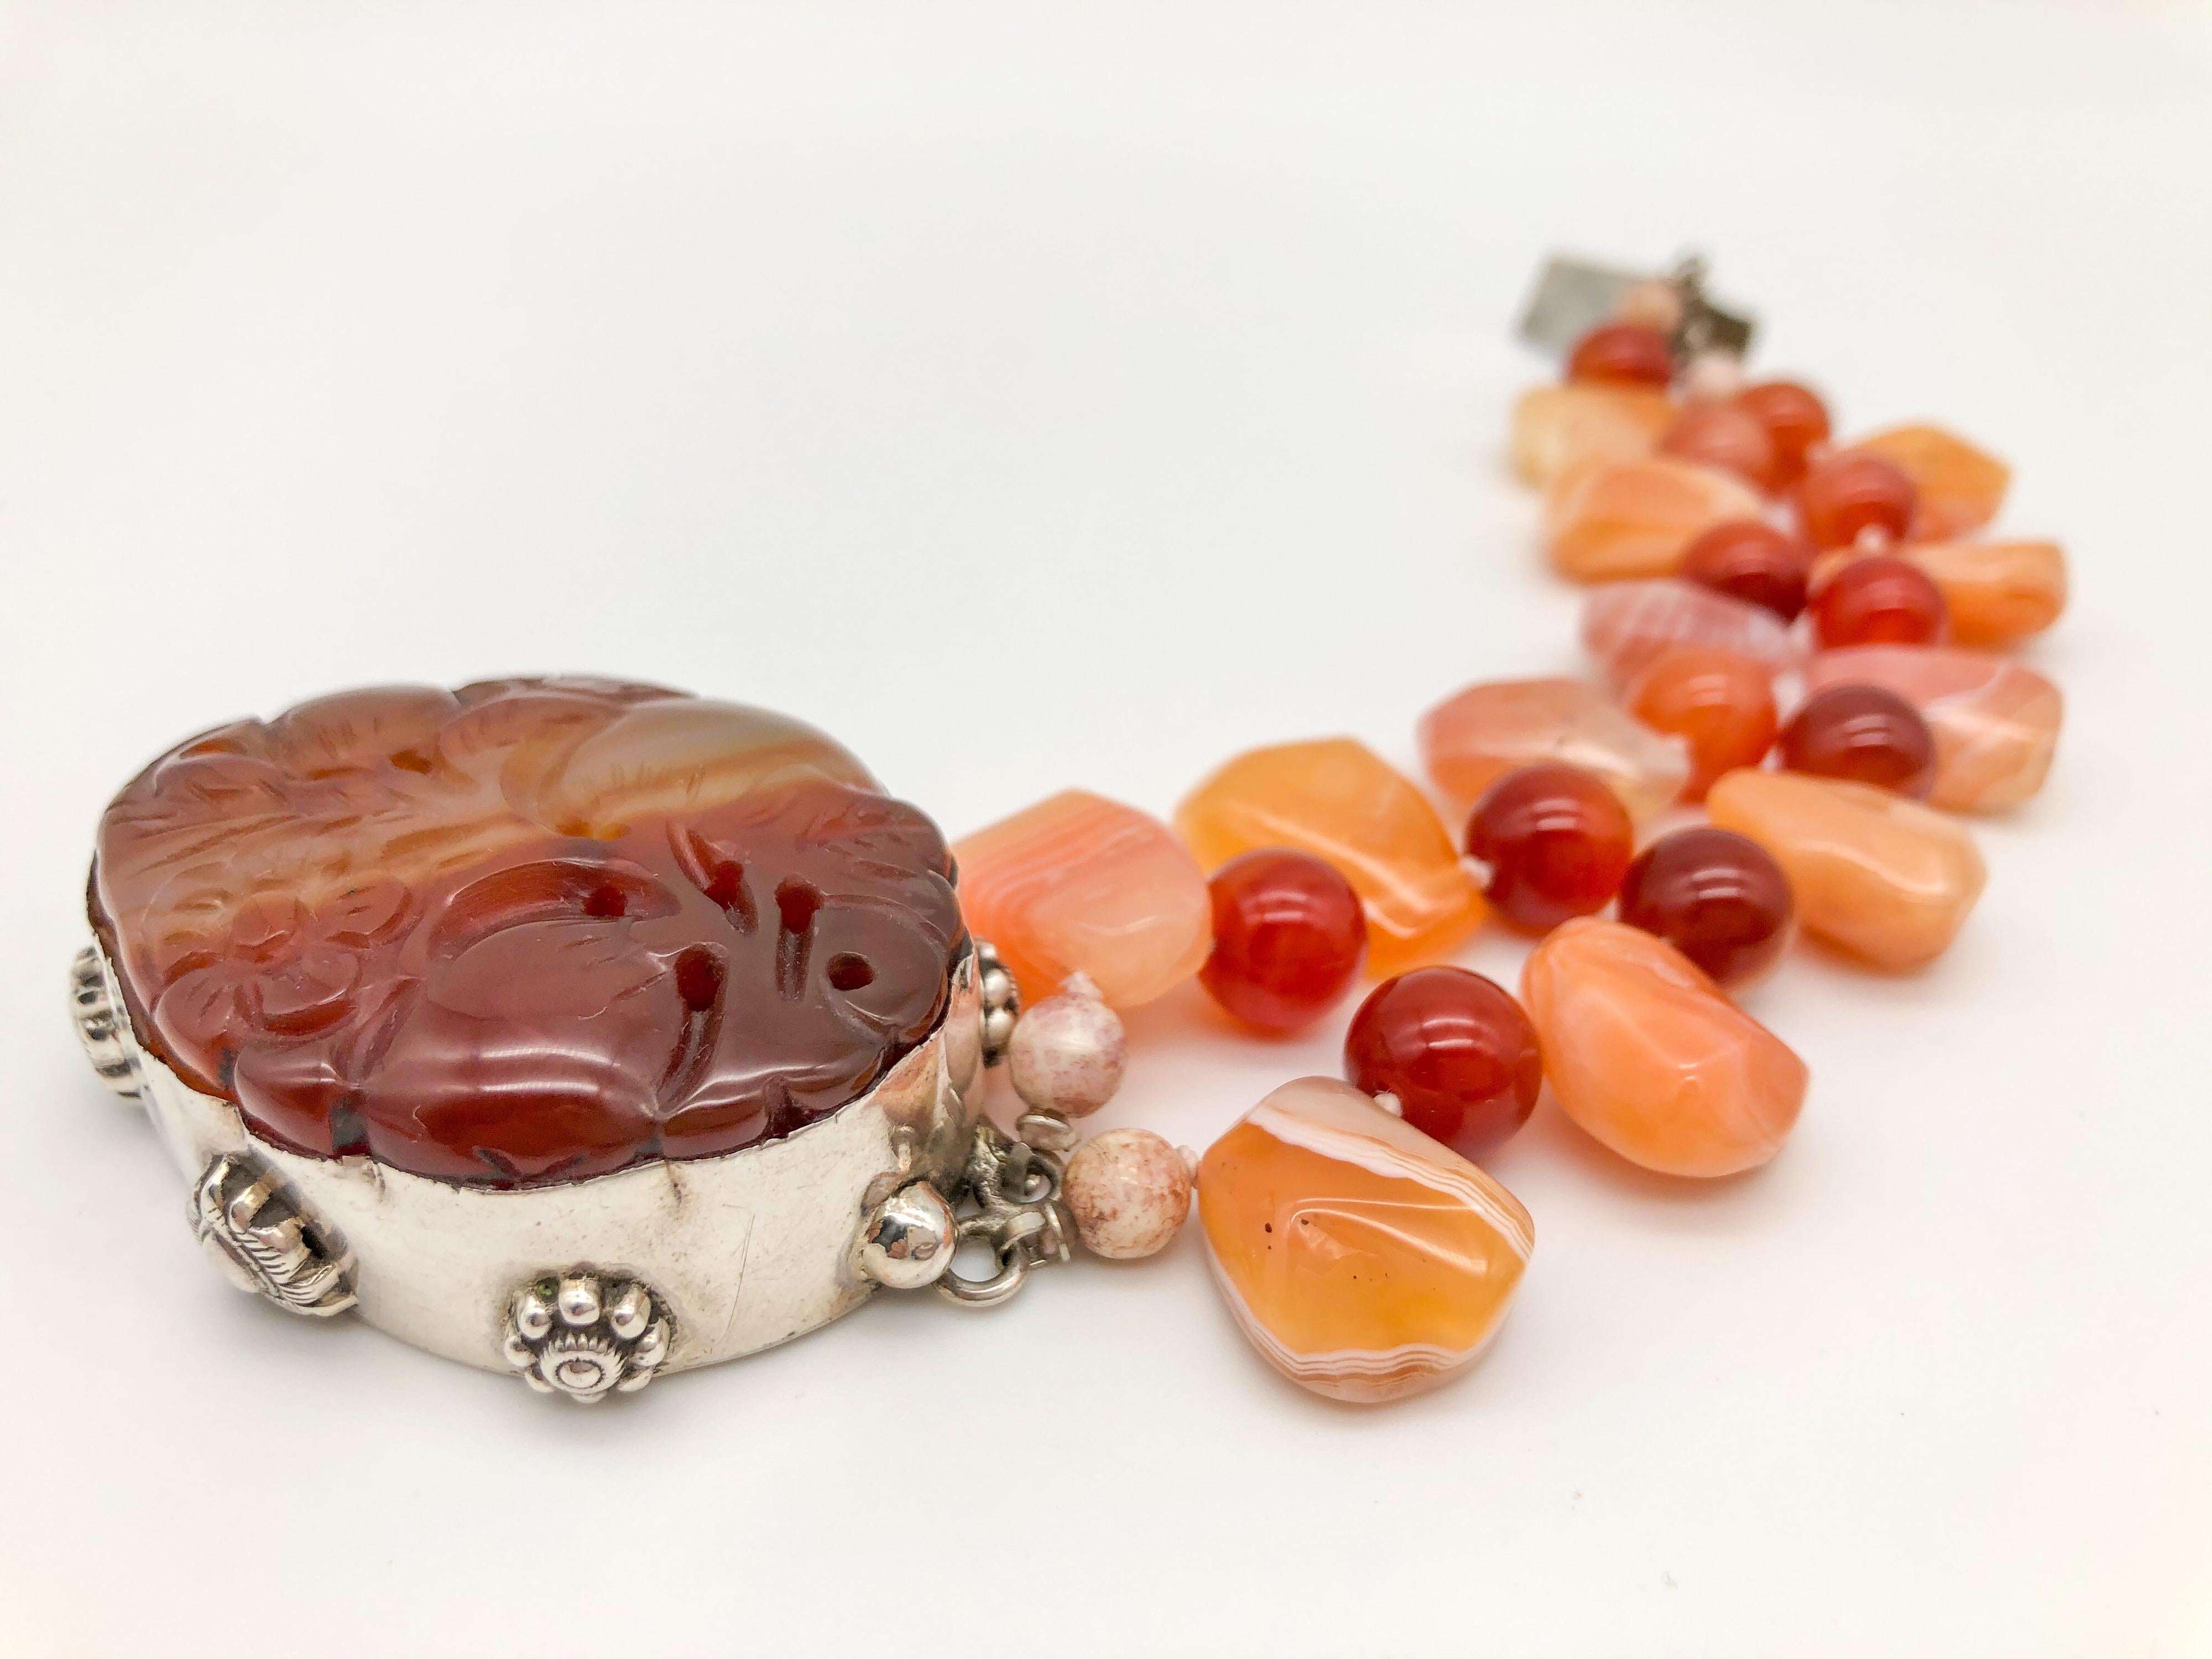 One-of-a-Kind
Carved Carnelian clasp anchor a 2-strand bracelet.
Two strands of mixed carnelian bead beads both translucent and opaque encircle a large carnelian carving of a peach tree in bloom. The carnelian carving is mounted on a sterling